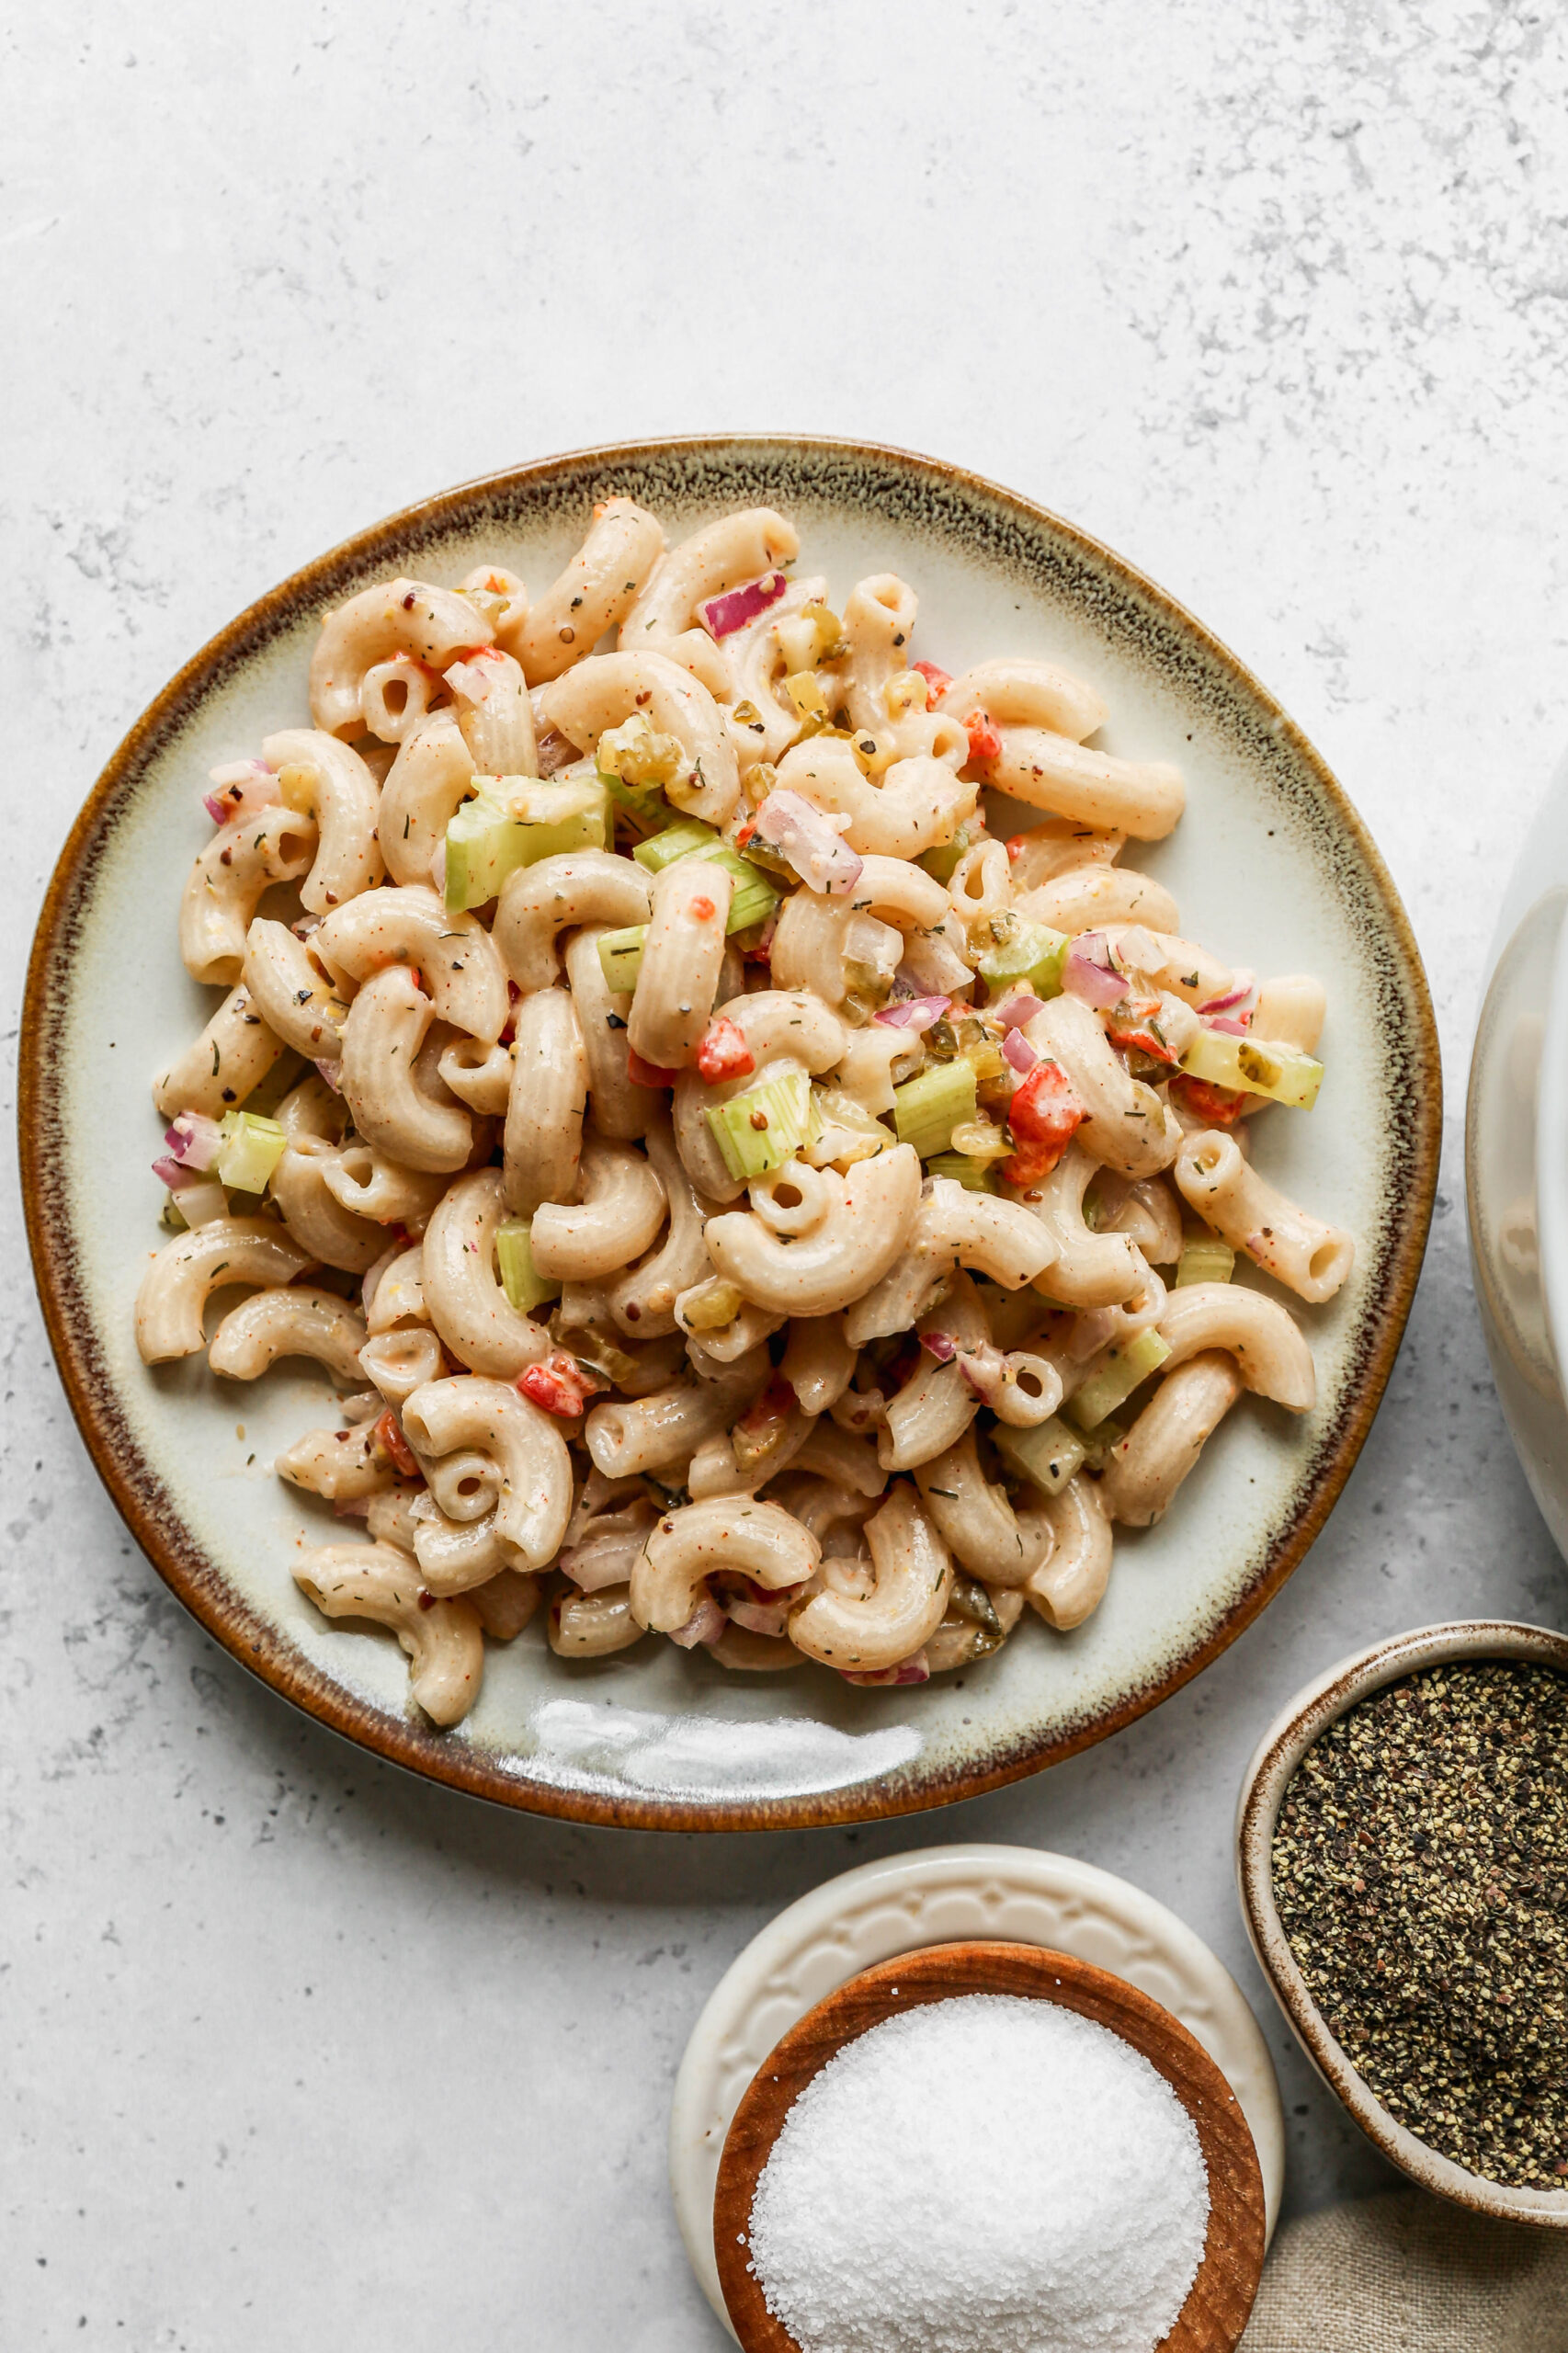 a plate of easy gluten free macaroni salad next to a small wooden bowl of salt.